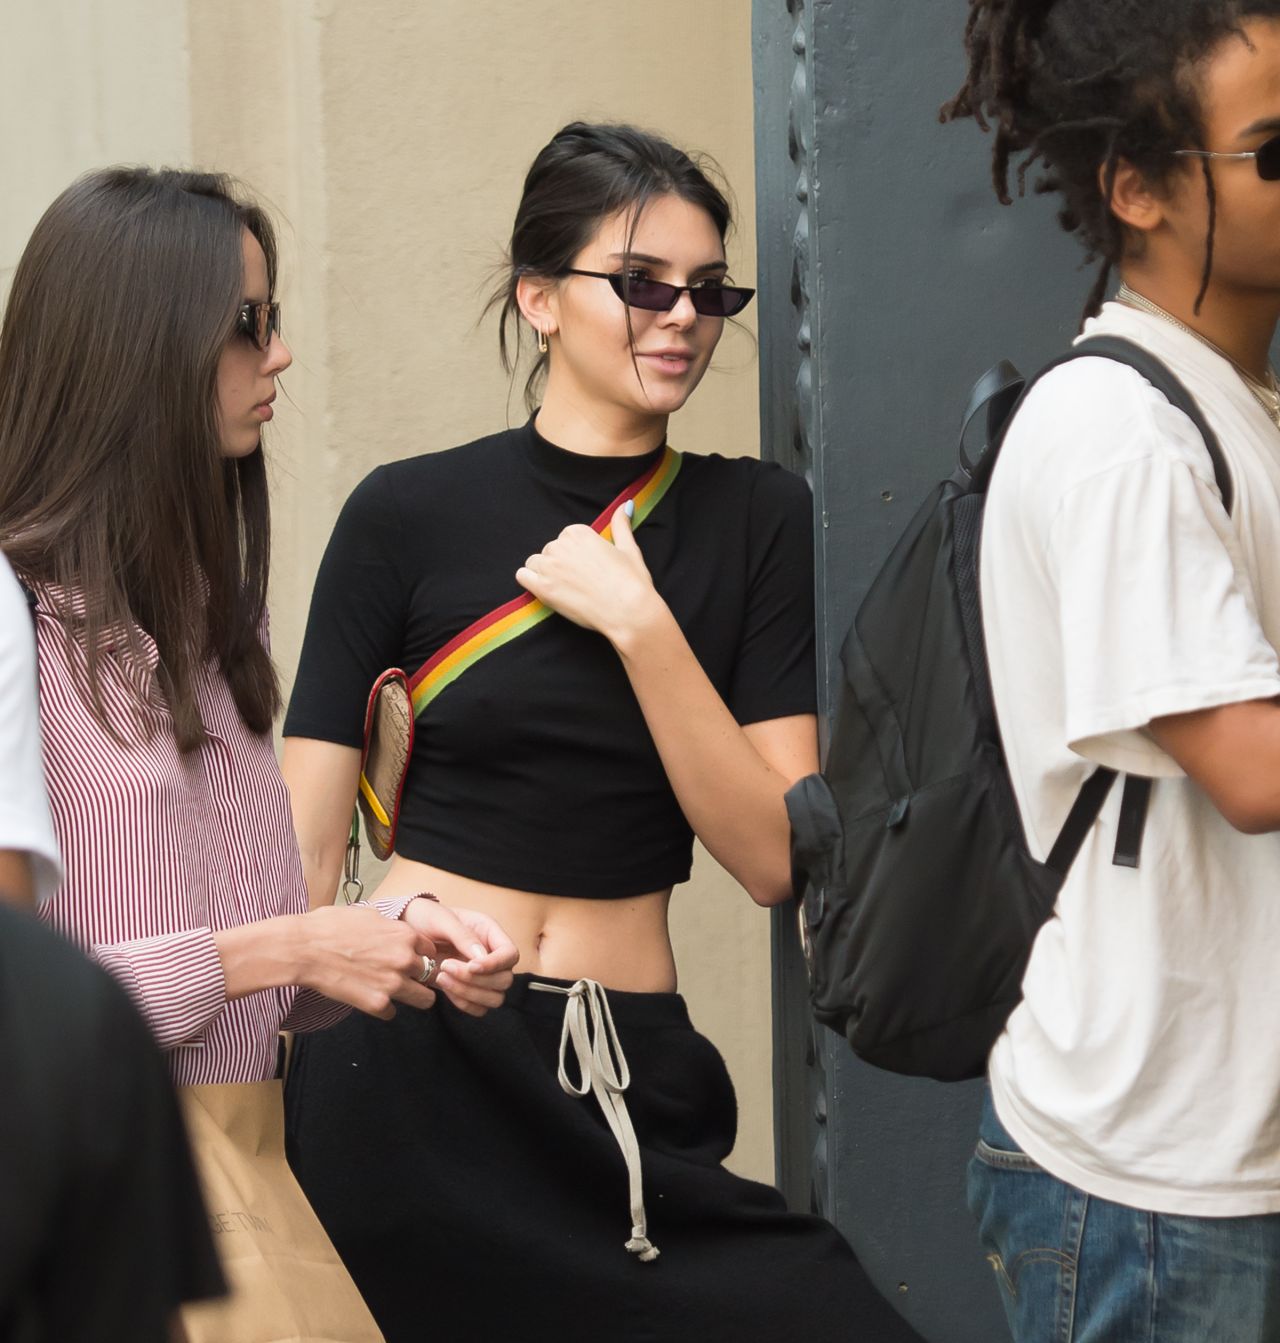 Kendall Jenner Steps Out With A$AP Rocky for NYFW DJ Gig: Pics